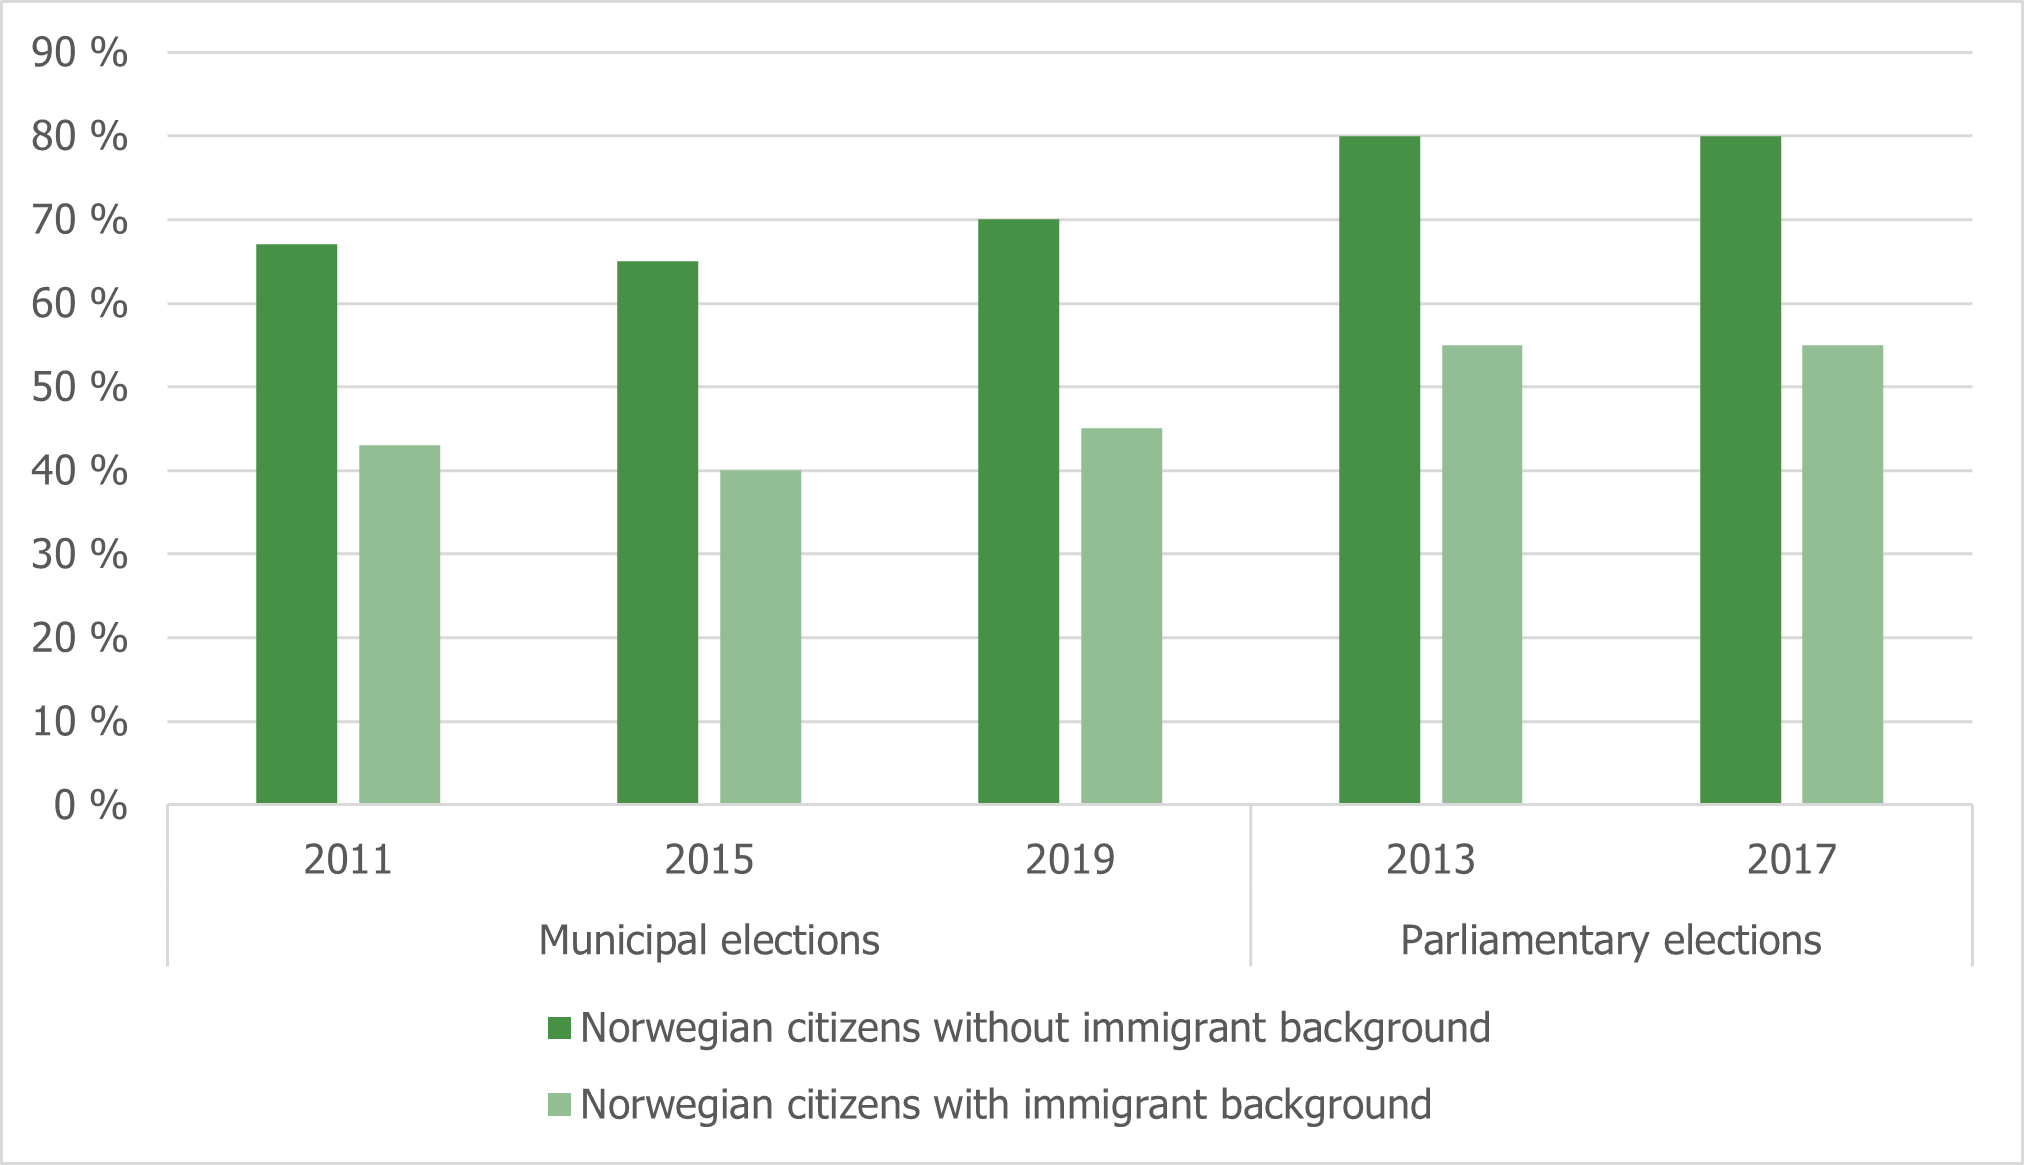 Figure 5.11. Electoral participation in parliamentary elections and municipal elections among Norwegian citizens, 2013-2017 (Kleven, 2017; Statistics Norway, 2019k).png